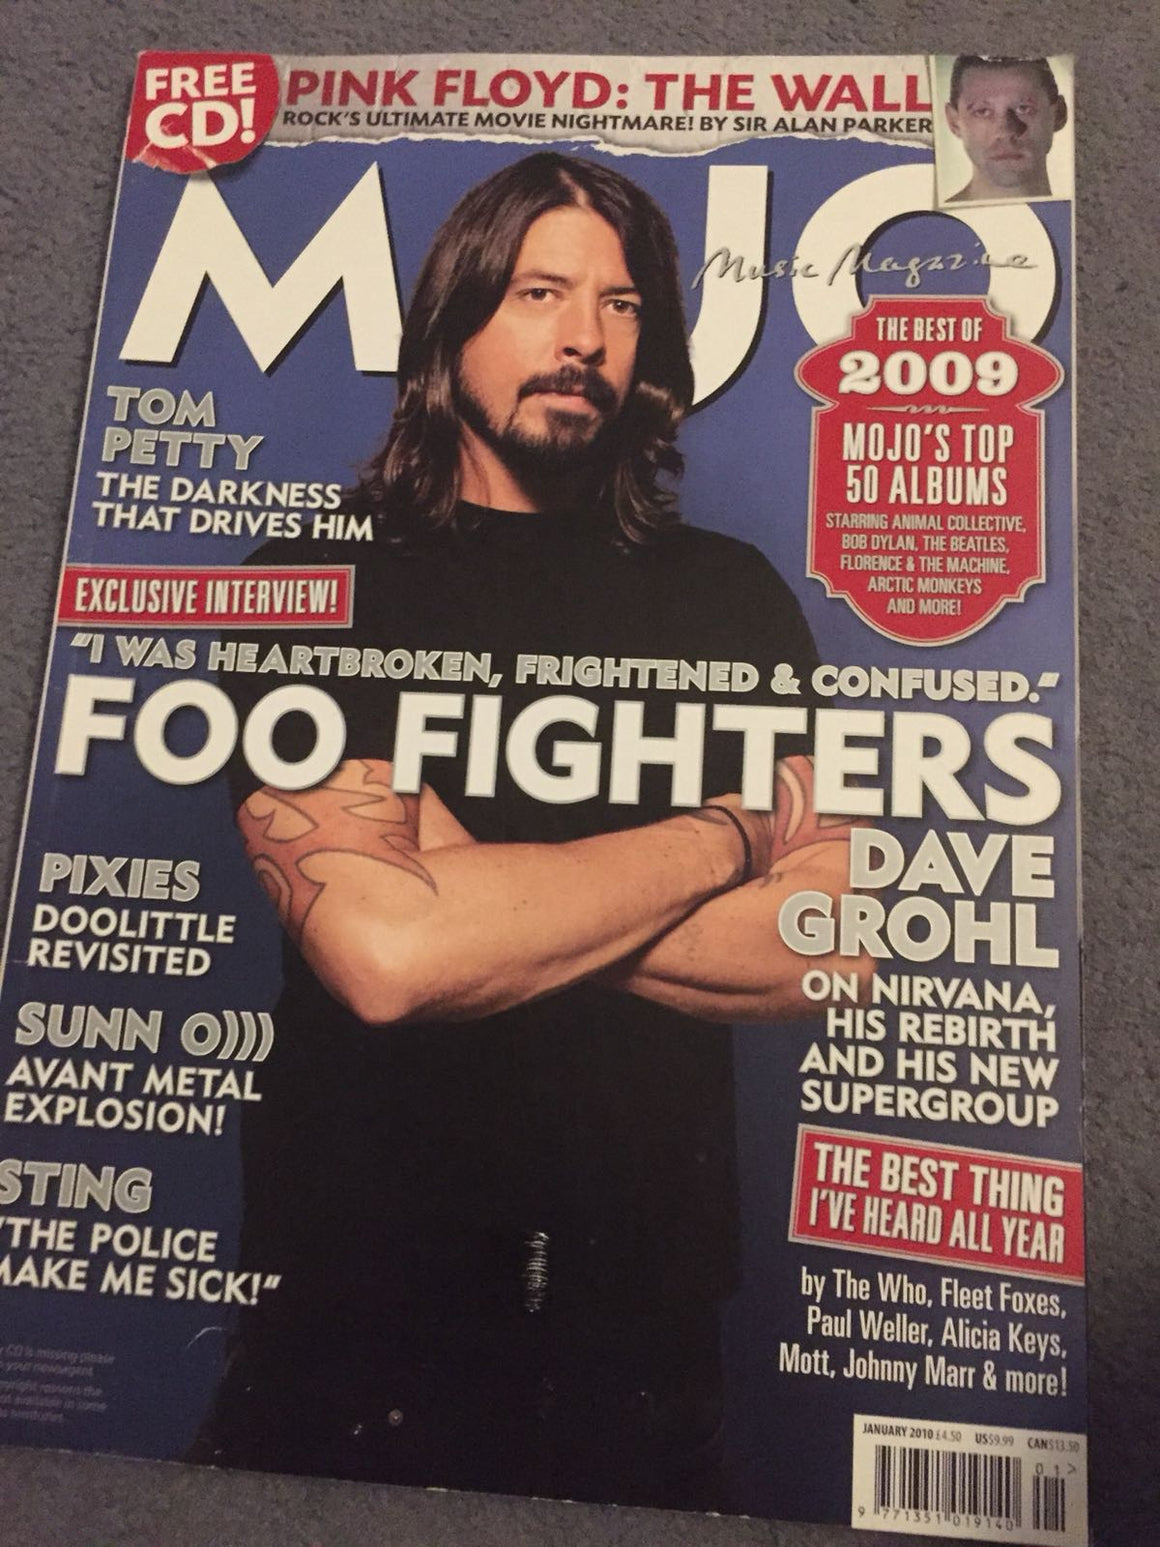 MOJO MAGAZINE - DAVE GROHL FOO FIGHTERS COVER (JANUARY 2010 - ISSUE 194)